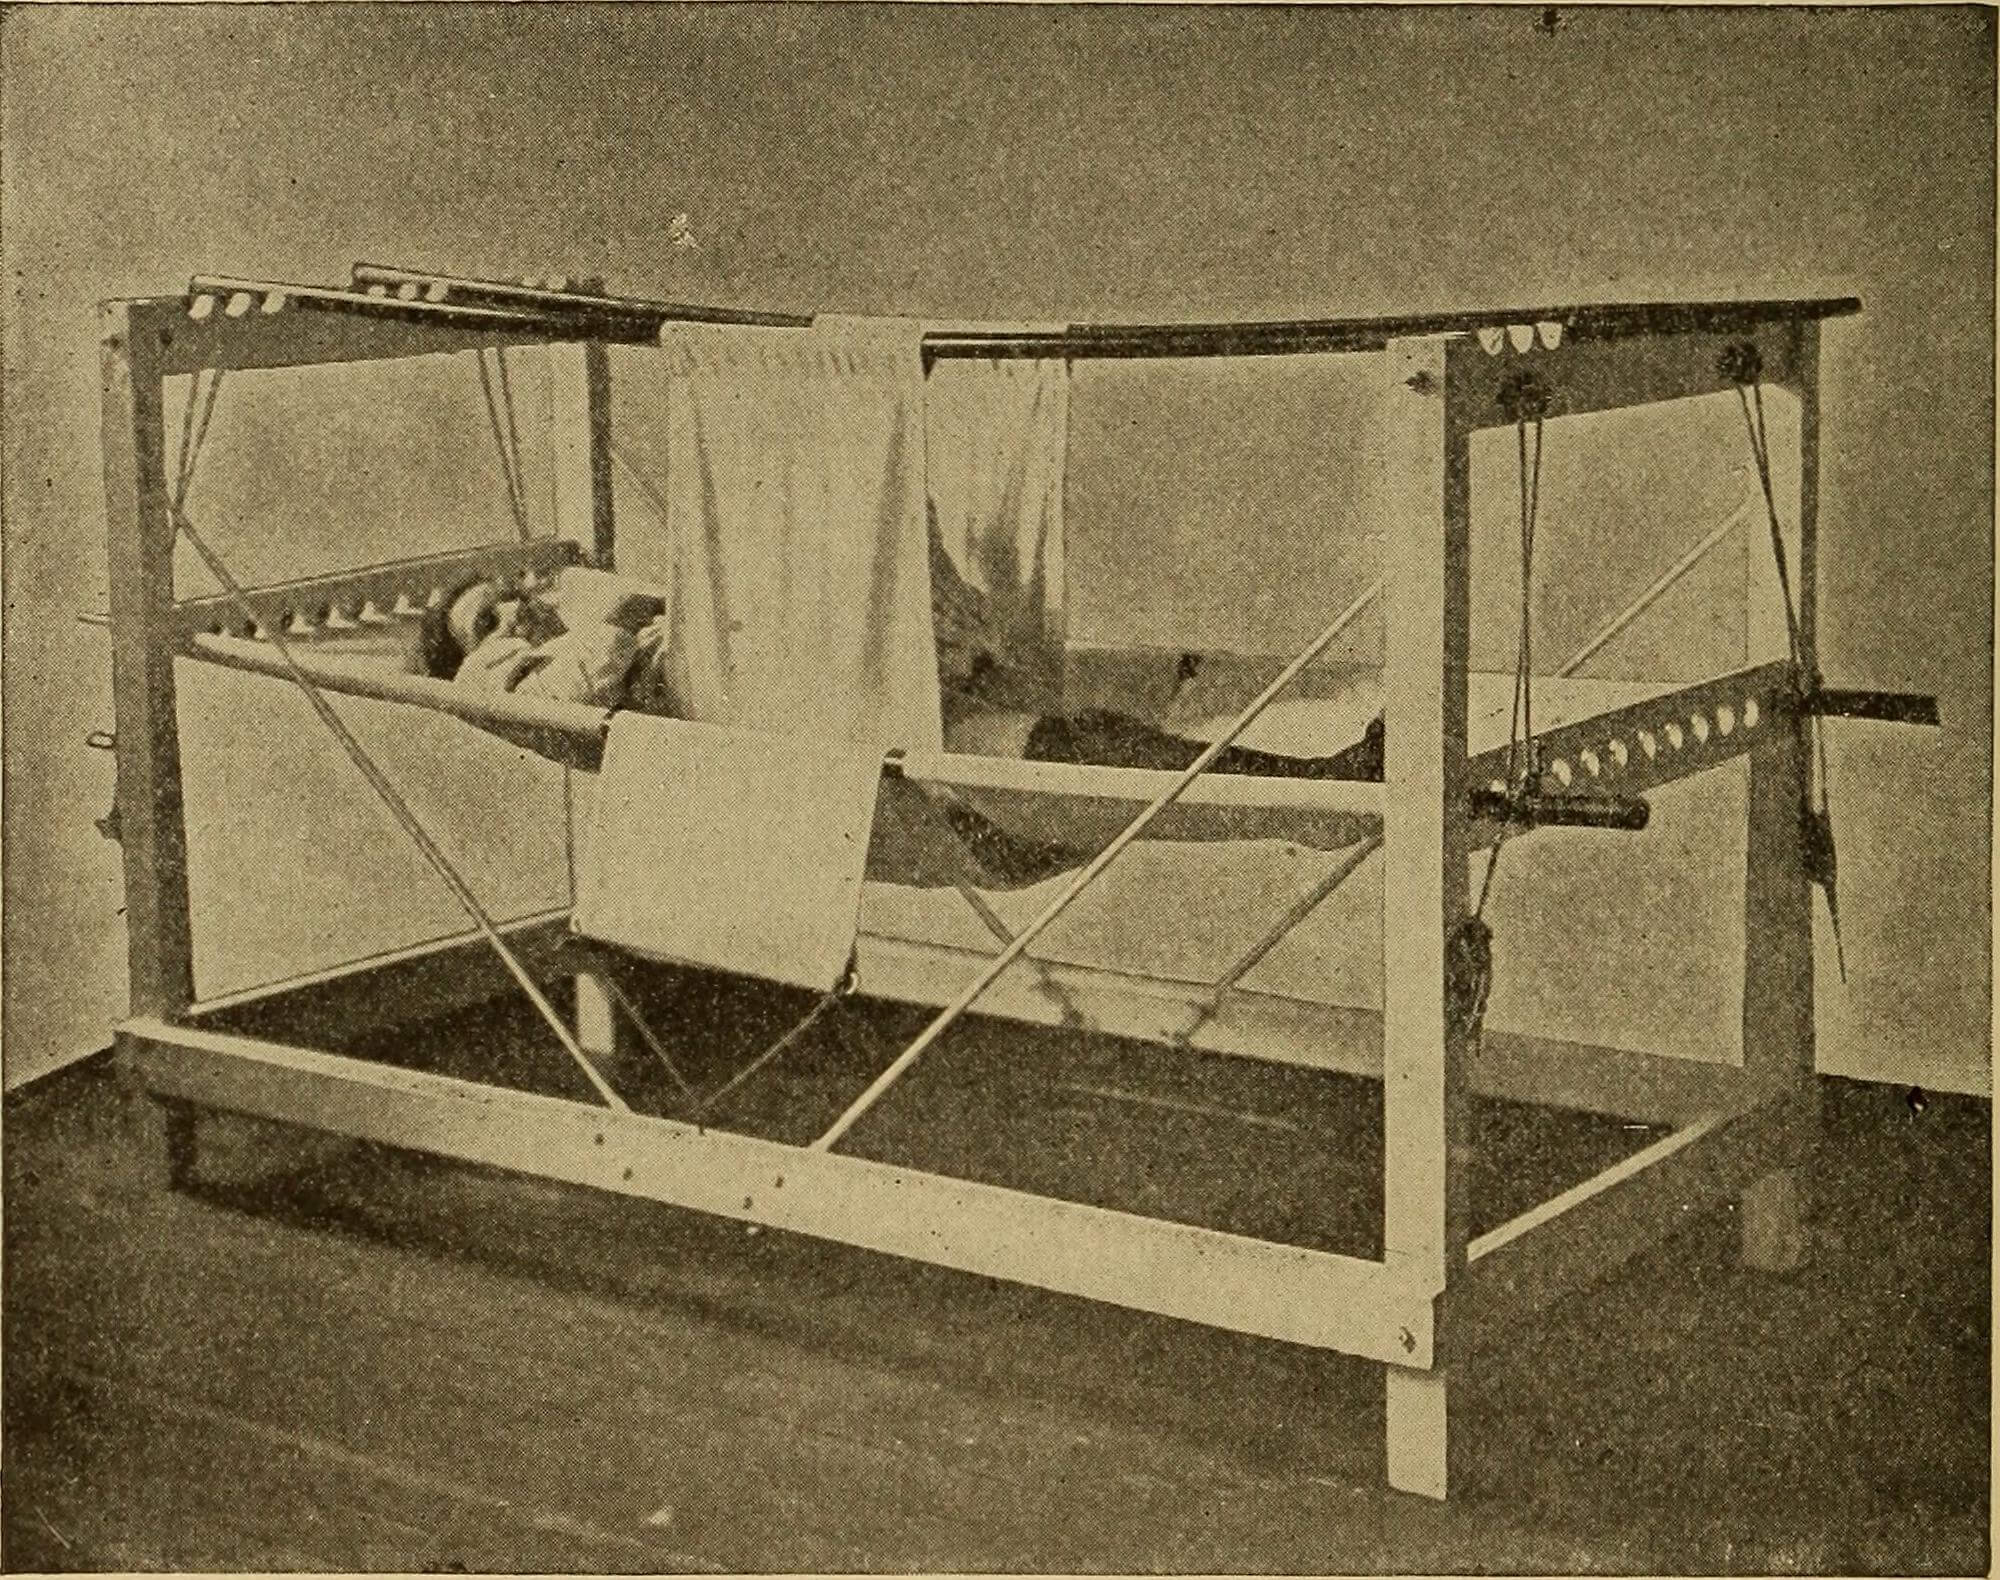 Patient in a symphysiotomy hammock after surgery, 1907